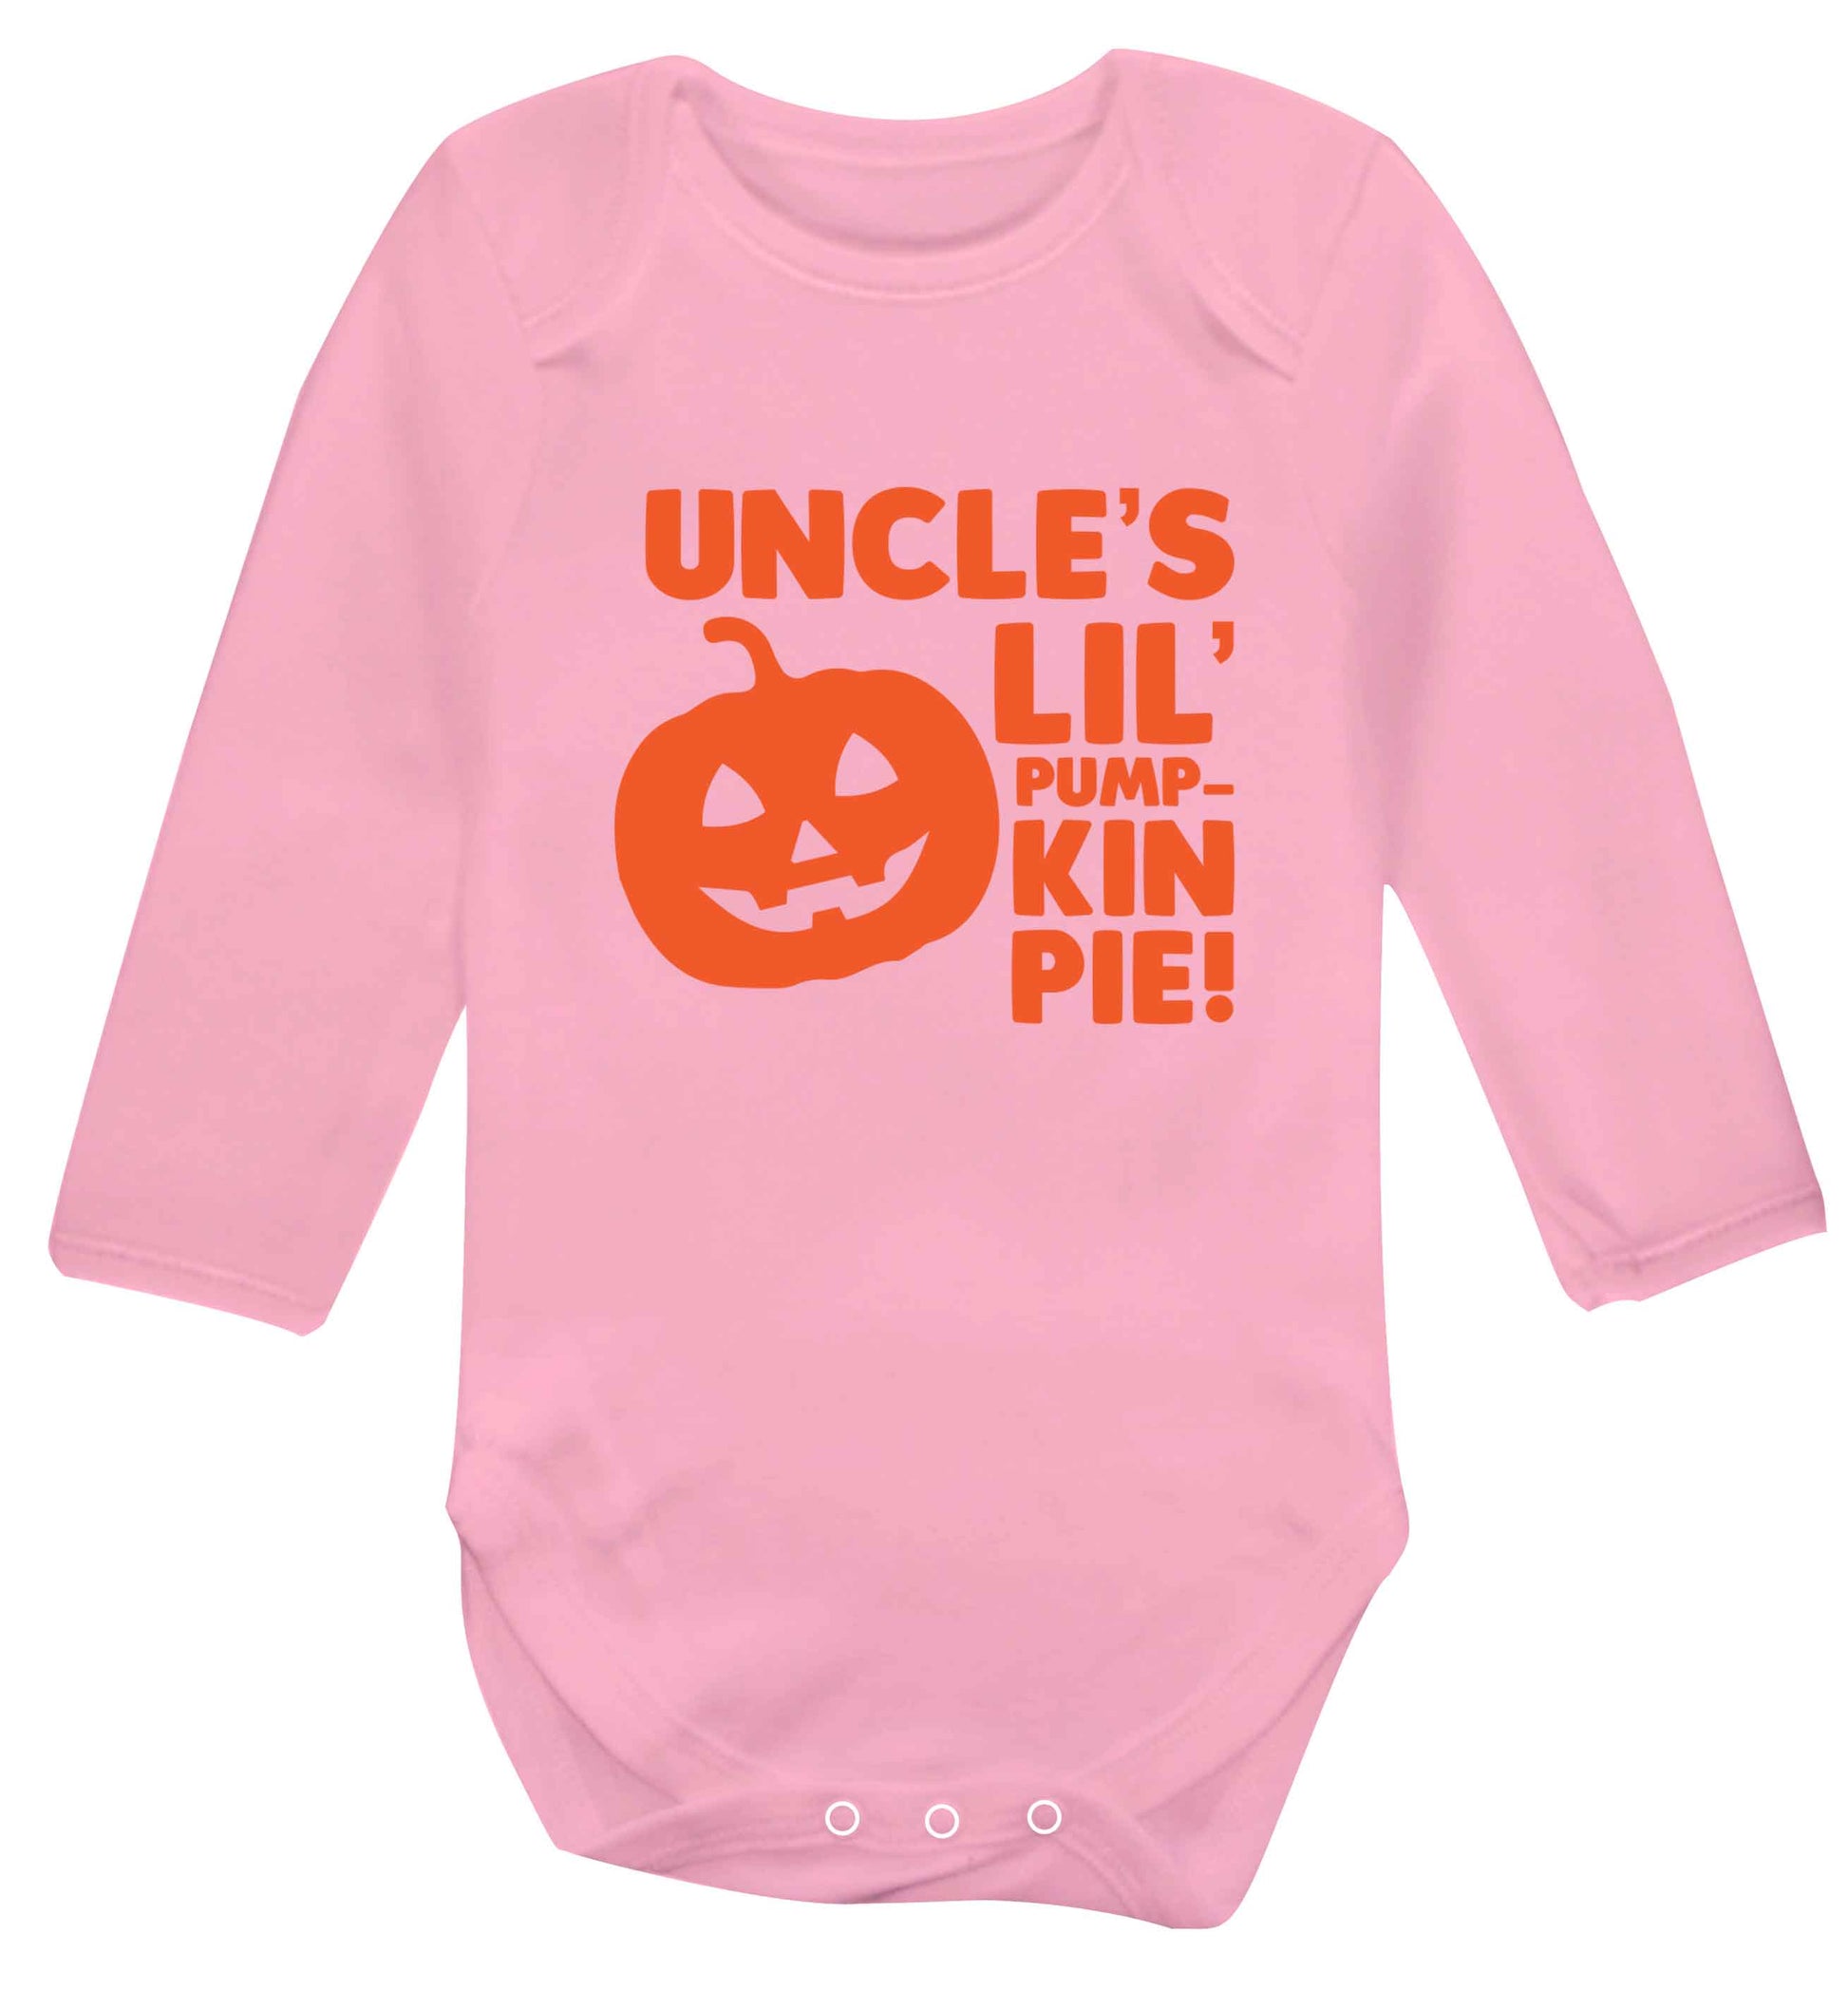 Uncle's lil' pumpkin pie baby vest long sleeved pale pink 6-12 months